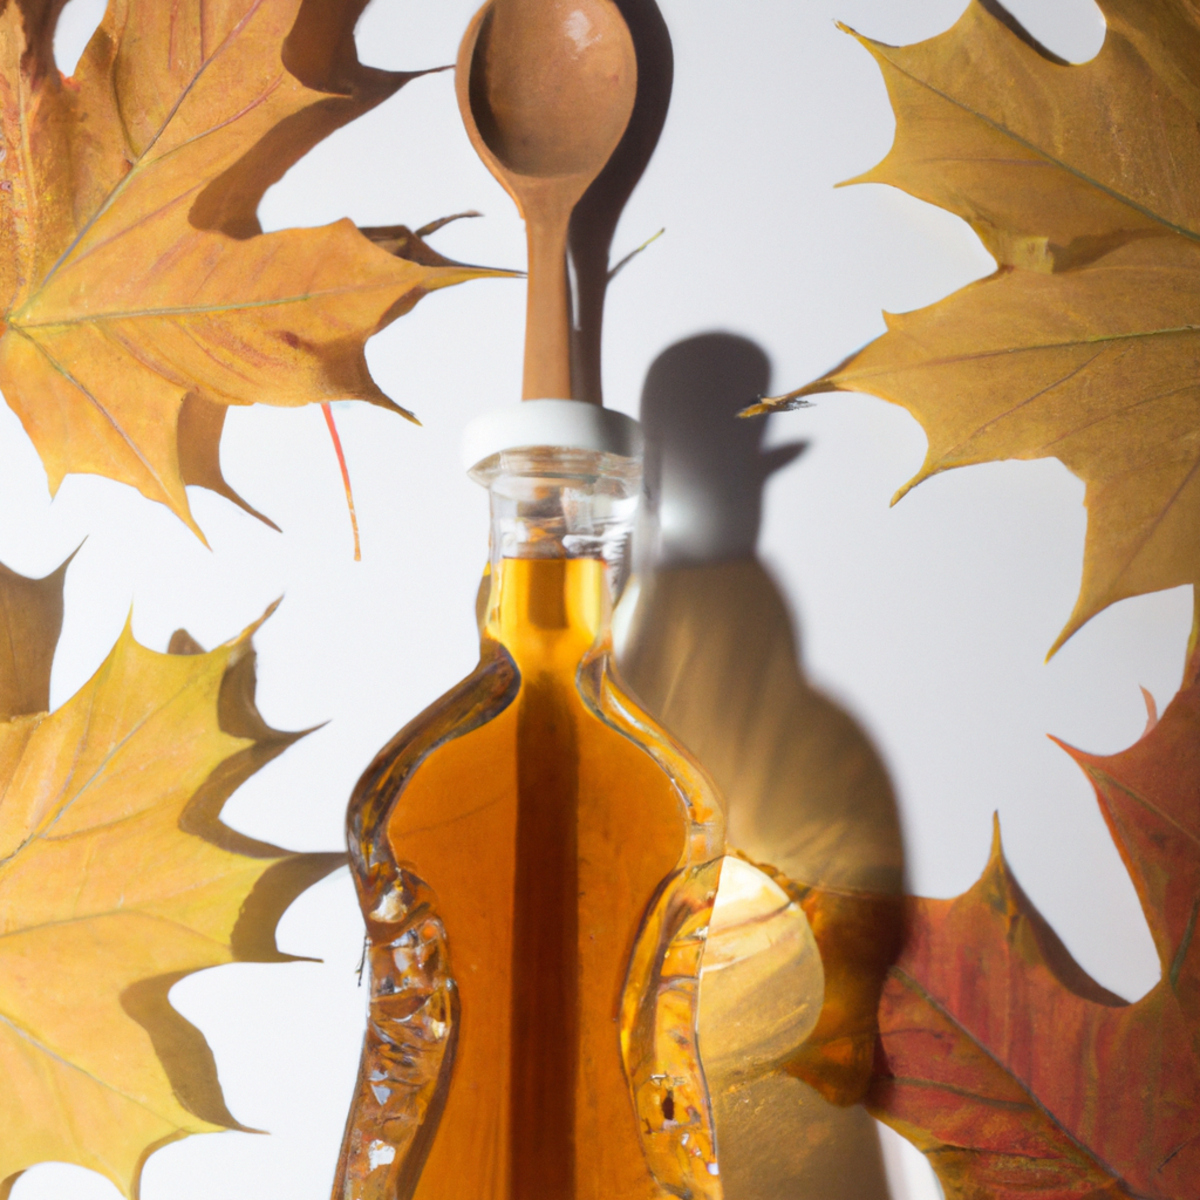 MSUD: Maple syrup bottle and urine sample container symbolize the metabolic impact of Maple Syrup Urine Disease.